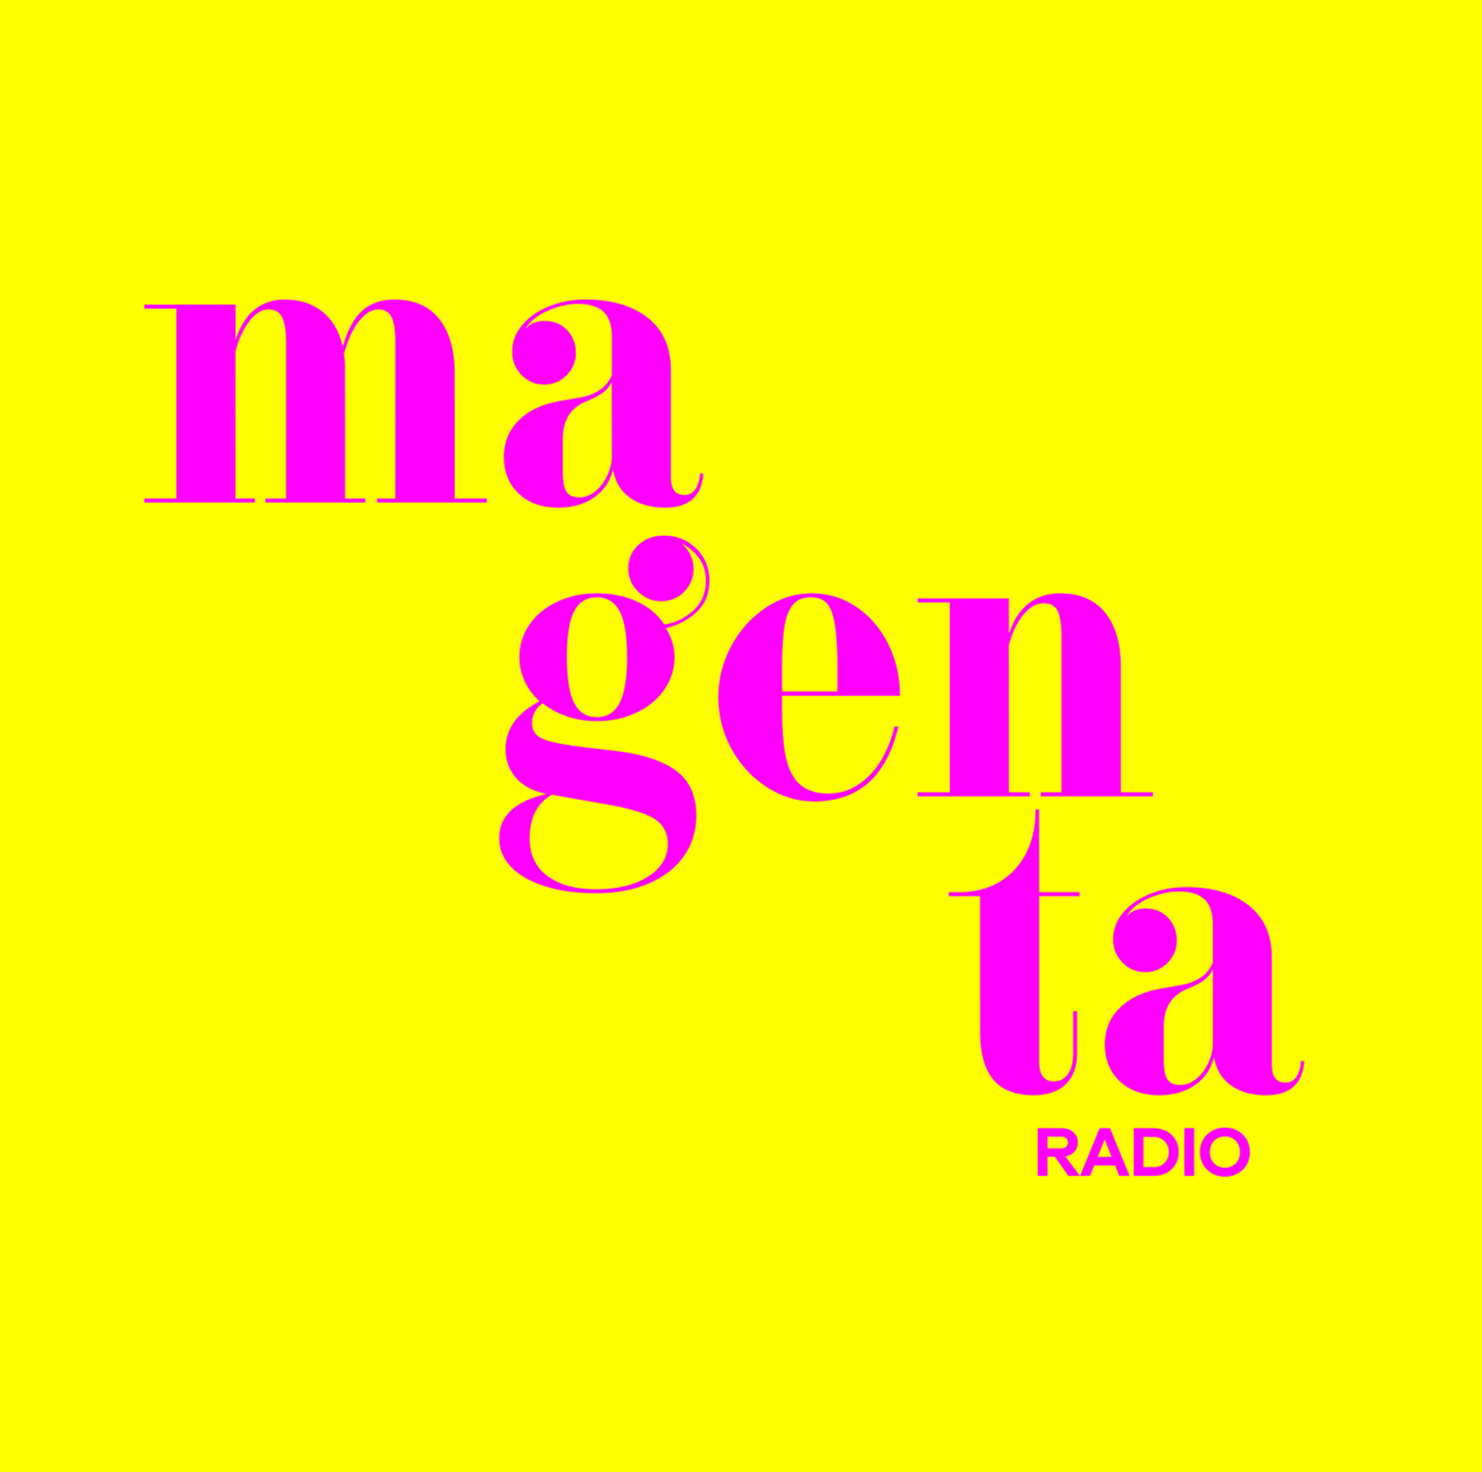 Art for All about the music [11] by Magenta Radio